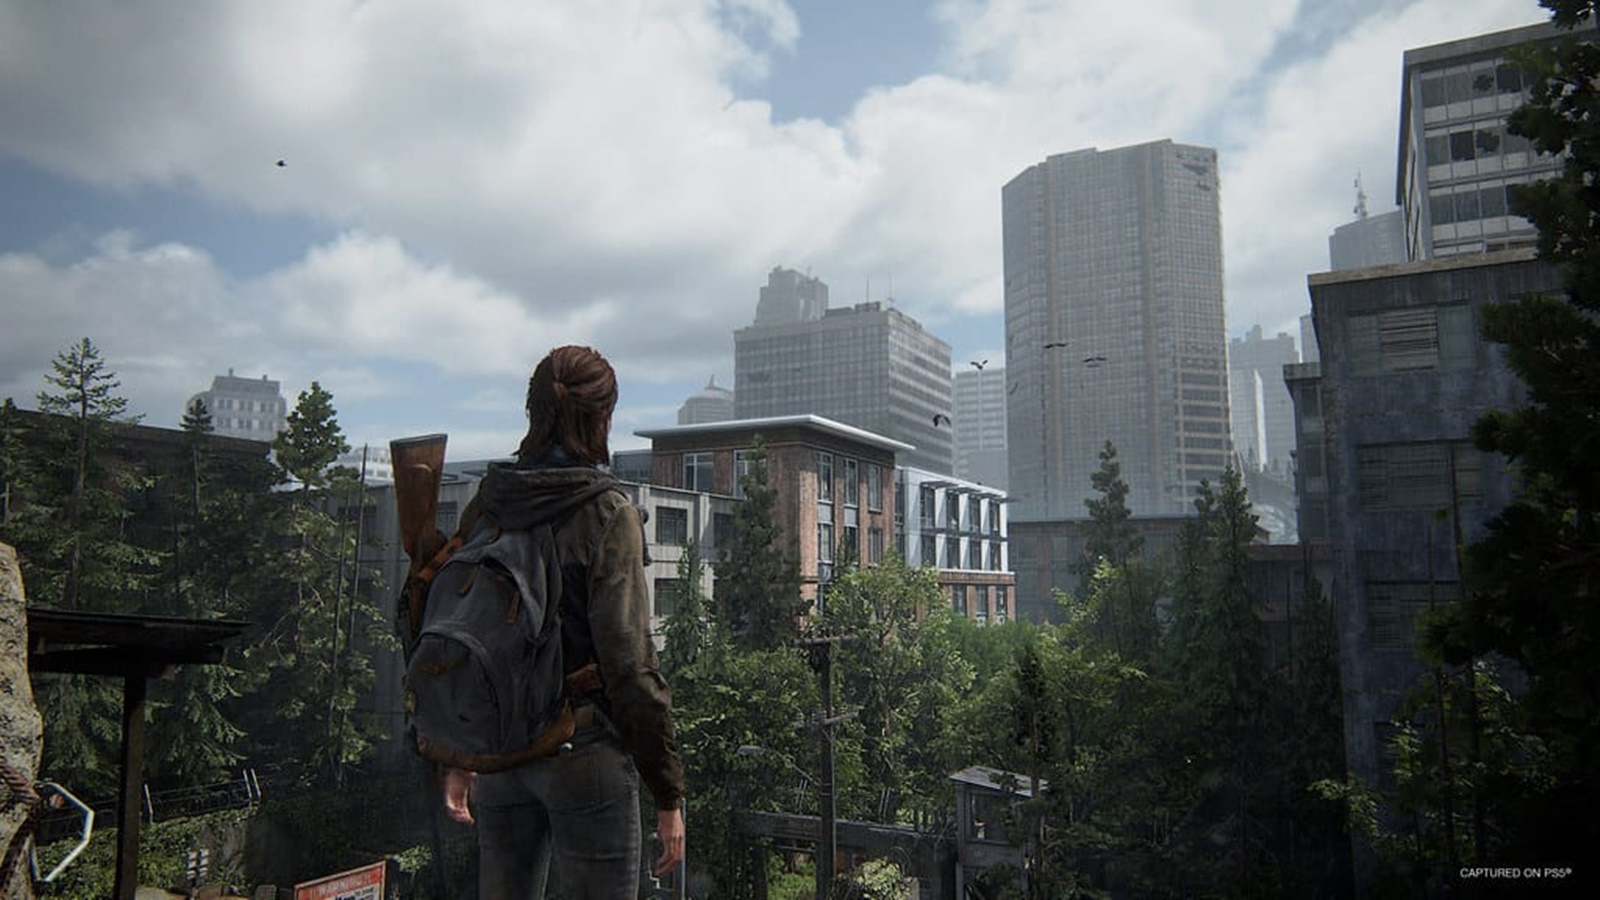 The Last of Us Part II Remastered coming to PS5 on January 19, 2024